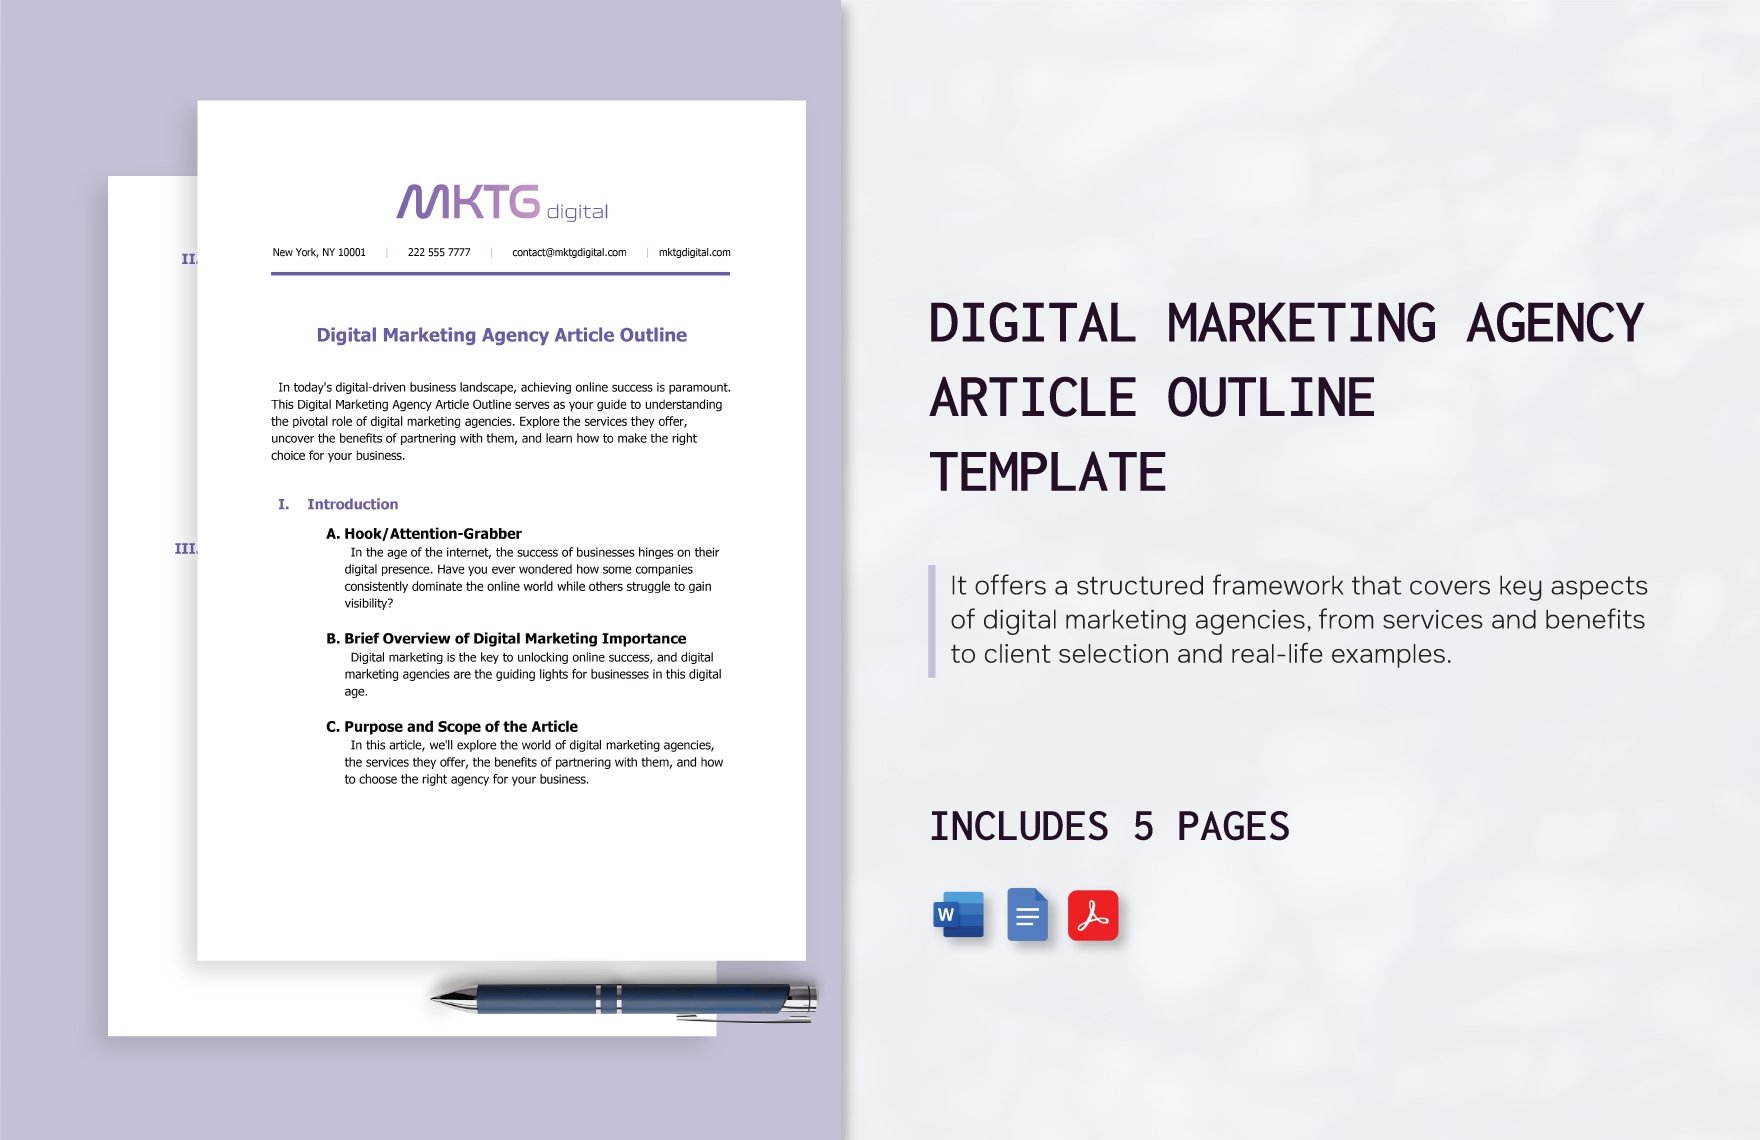 Digital Marketing Agency Article Outline Template in Word, Google Docs, PDF